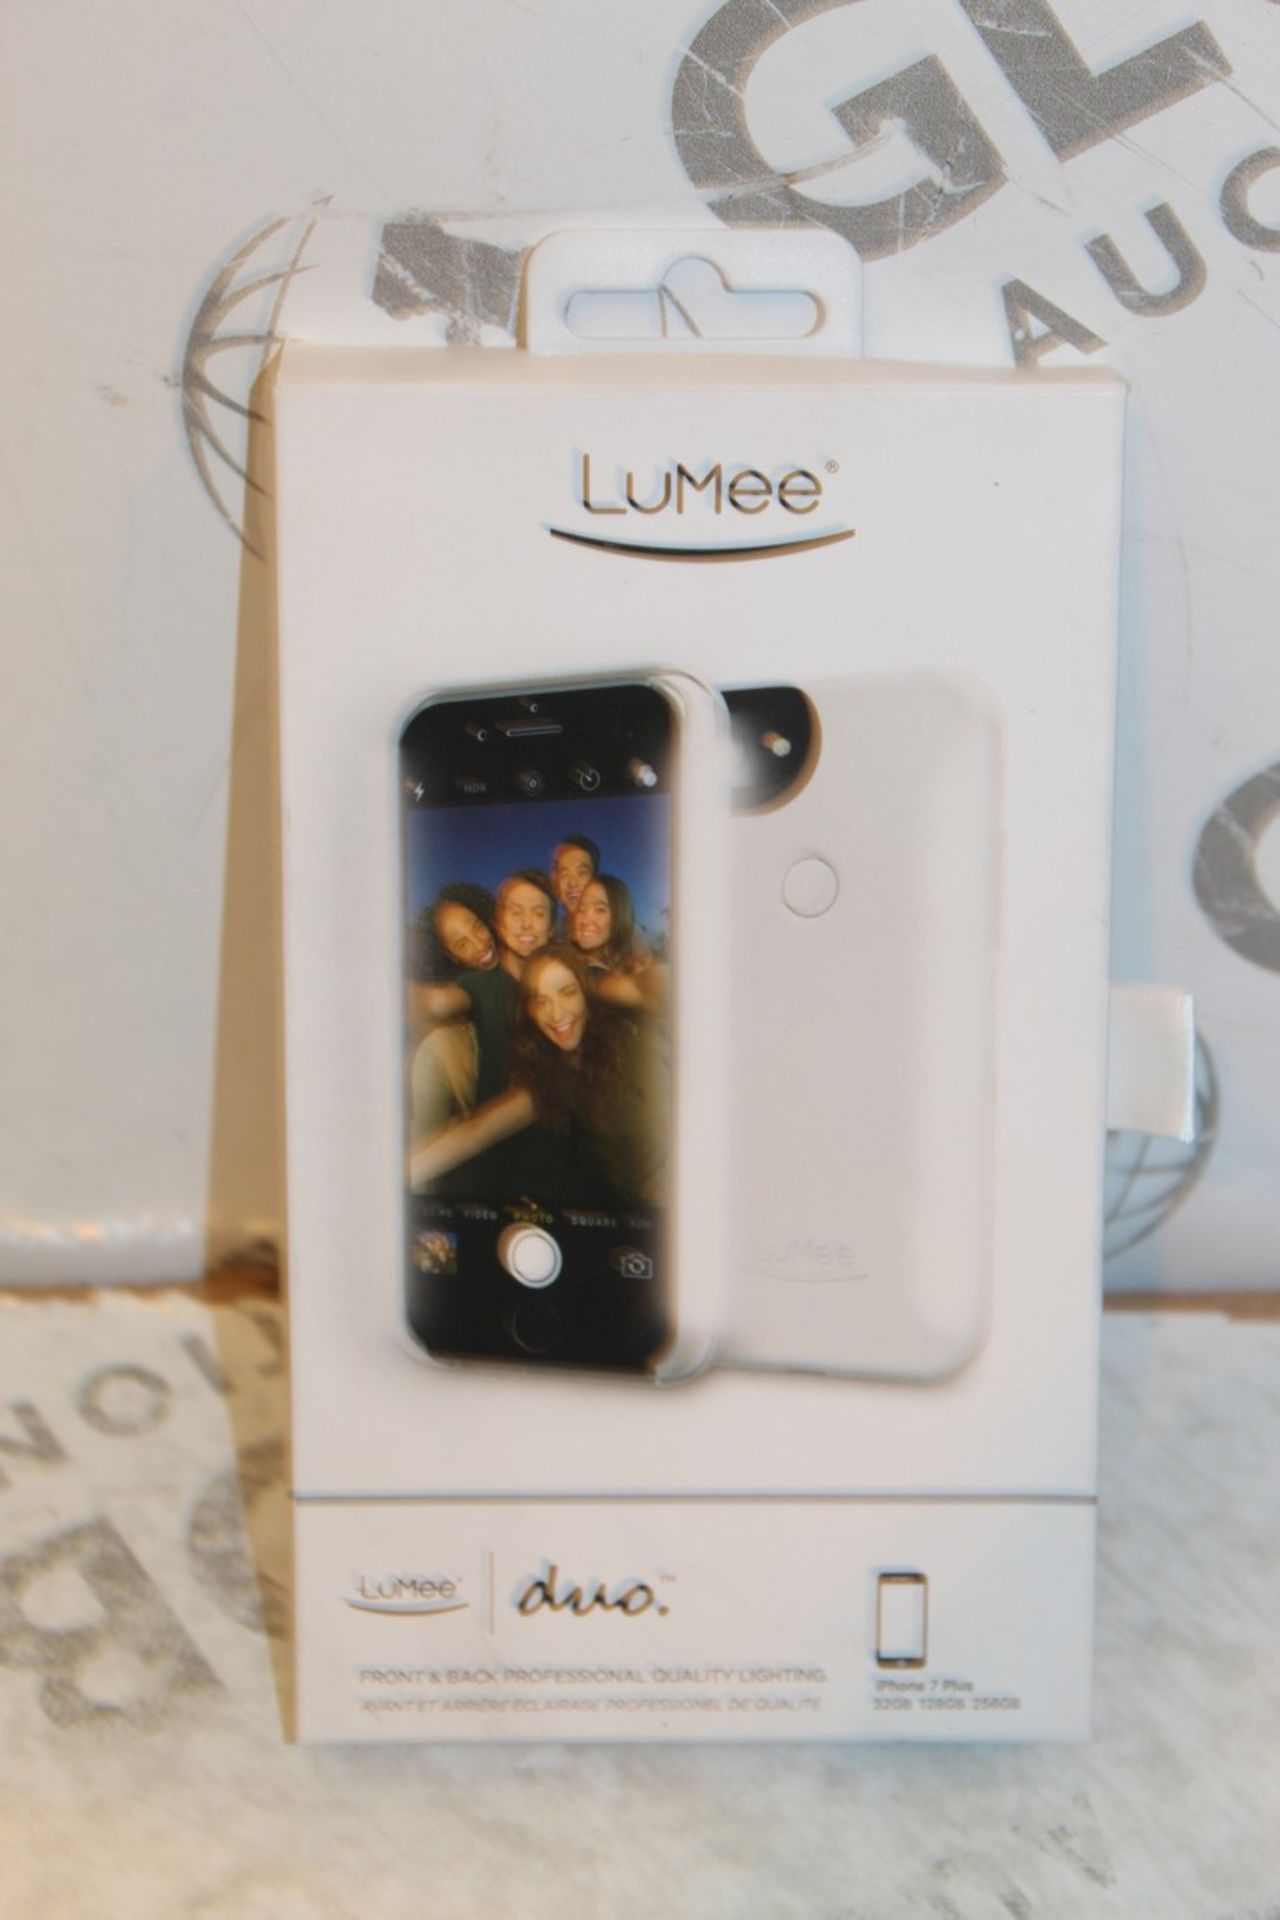 Lot to Contain 2 Boxed Brand New Lumee Duo Iphone 7 Plus Perfect Lighting Phone Cases (White) RRP £